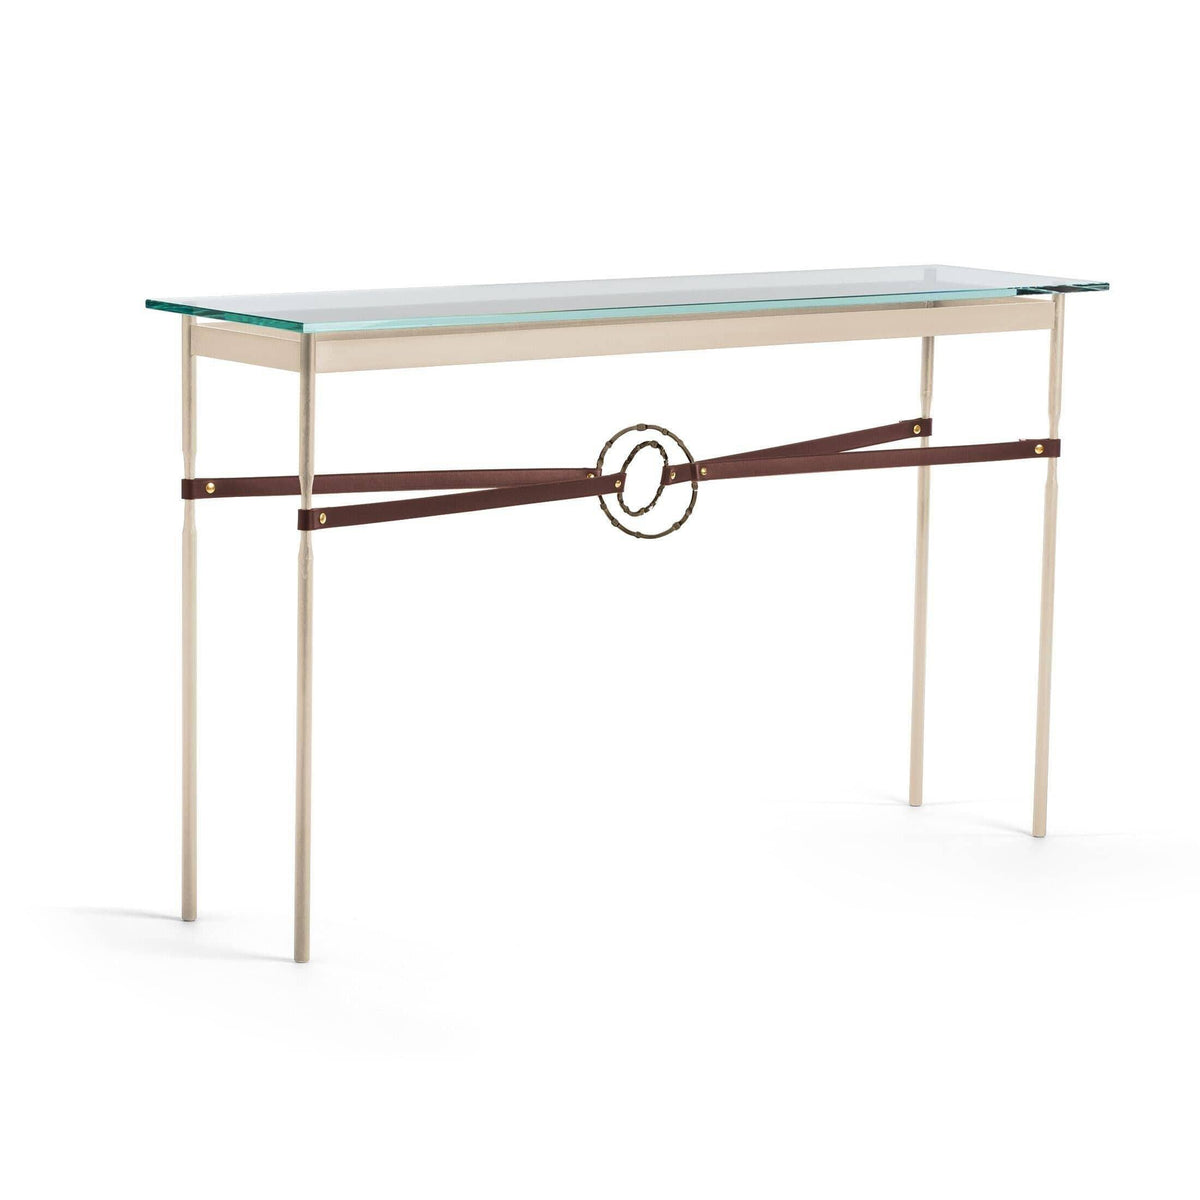 Hubbardton Forge - Equus Brown Leather Console Table - 750118-84-05-LB-VA0714 | Montreal Lighting & Hardware